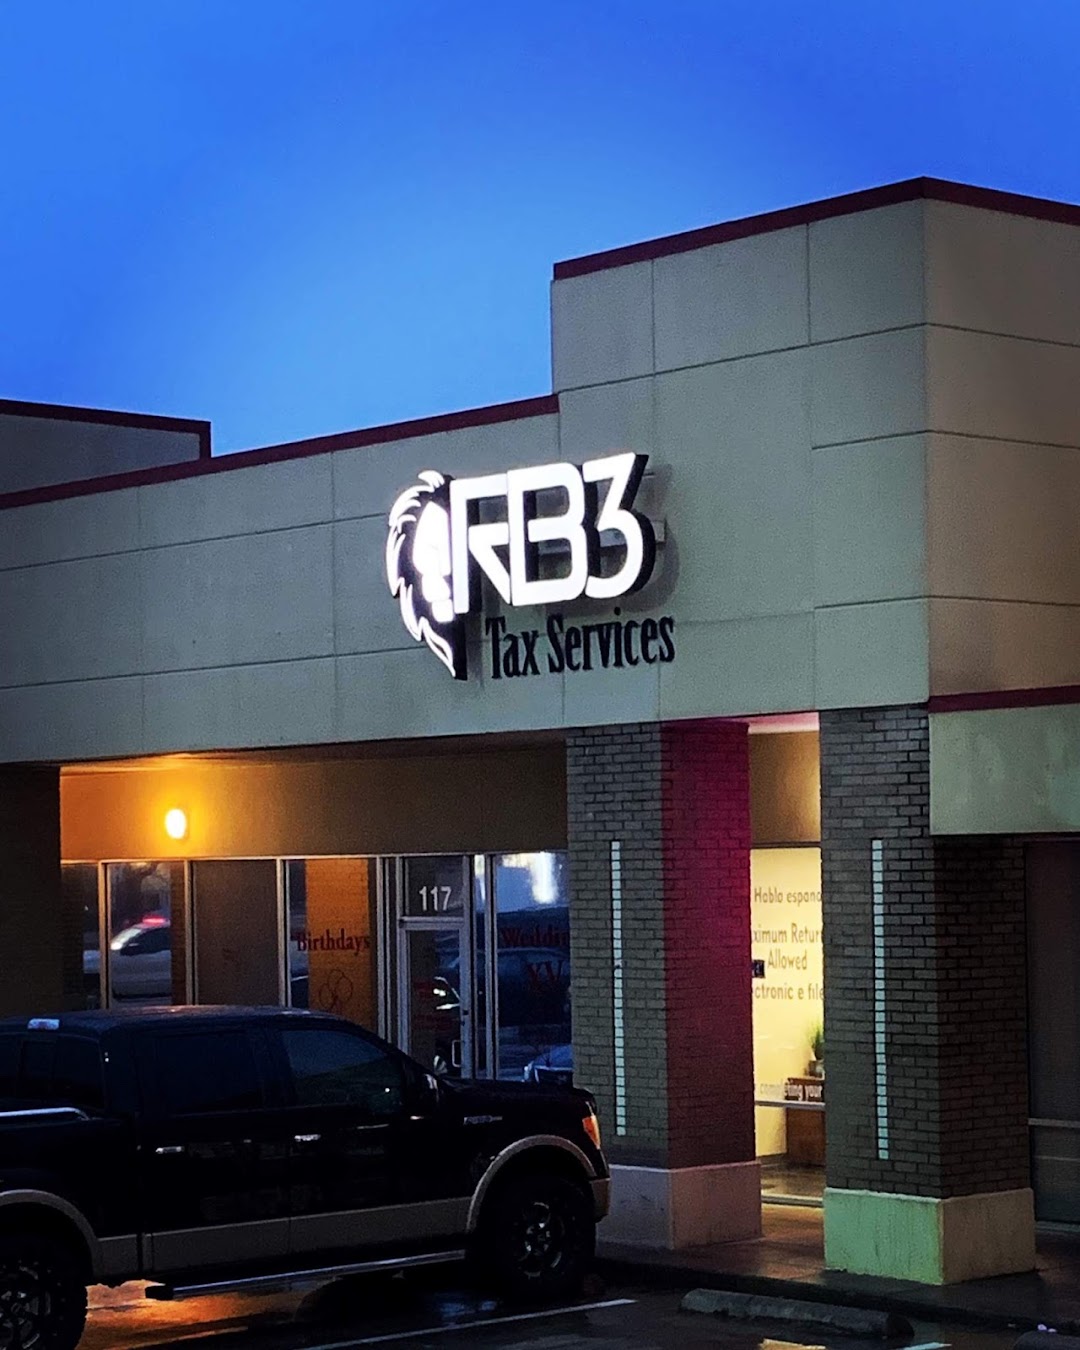 RB3 Financial Services